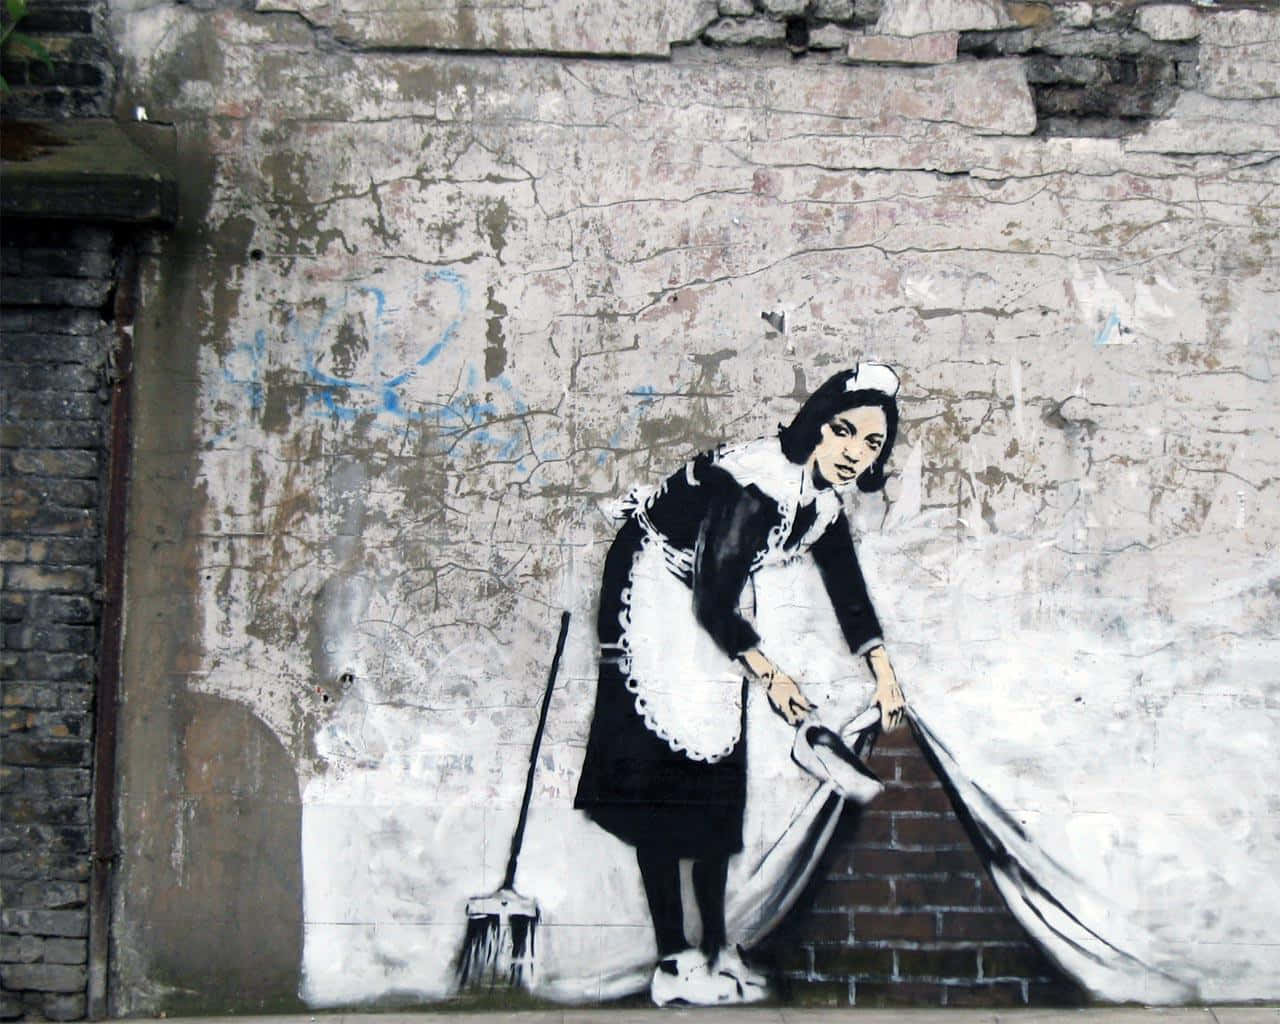 Banksy’s "Crack is Wack" mural as seen in his home country of the UK